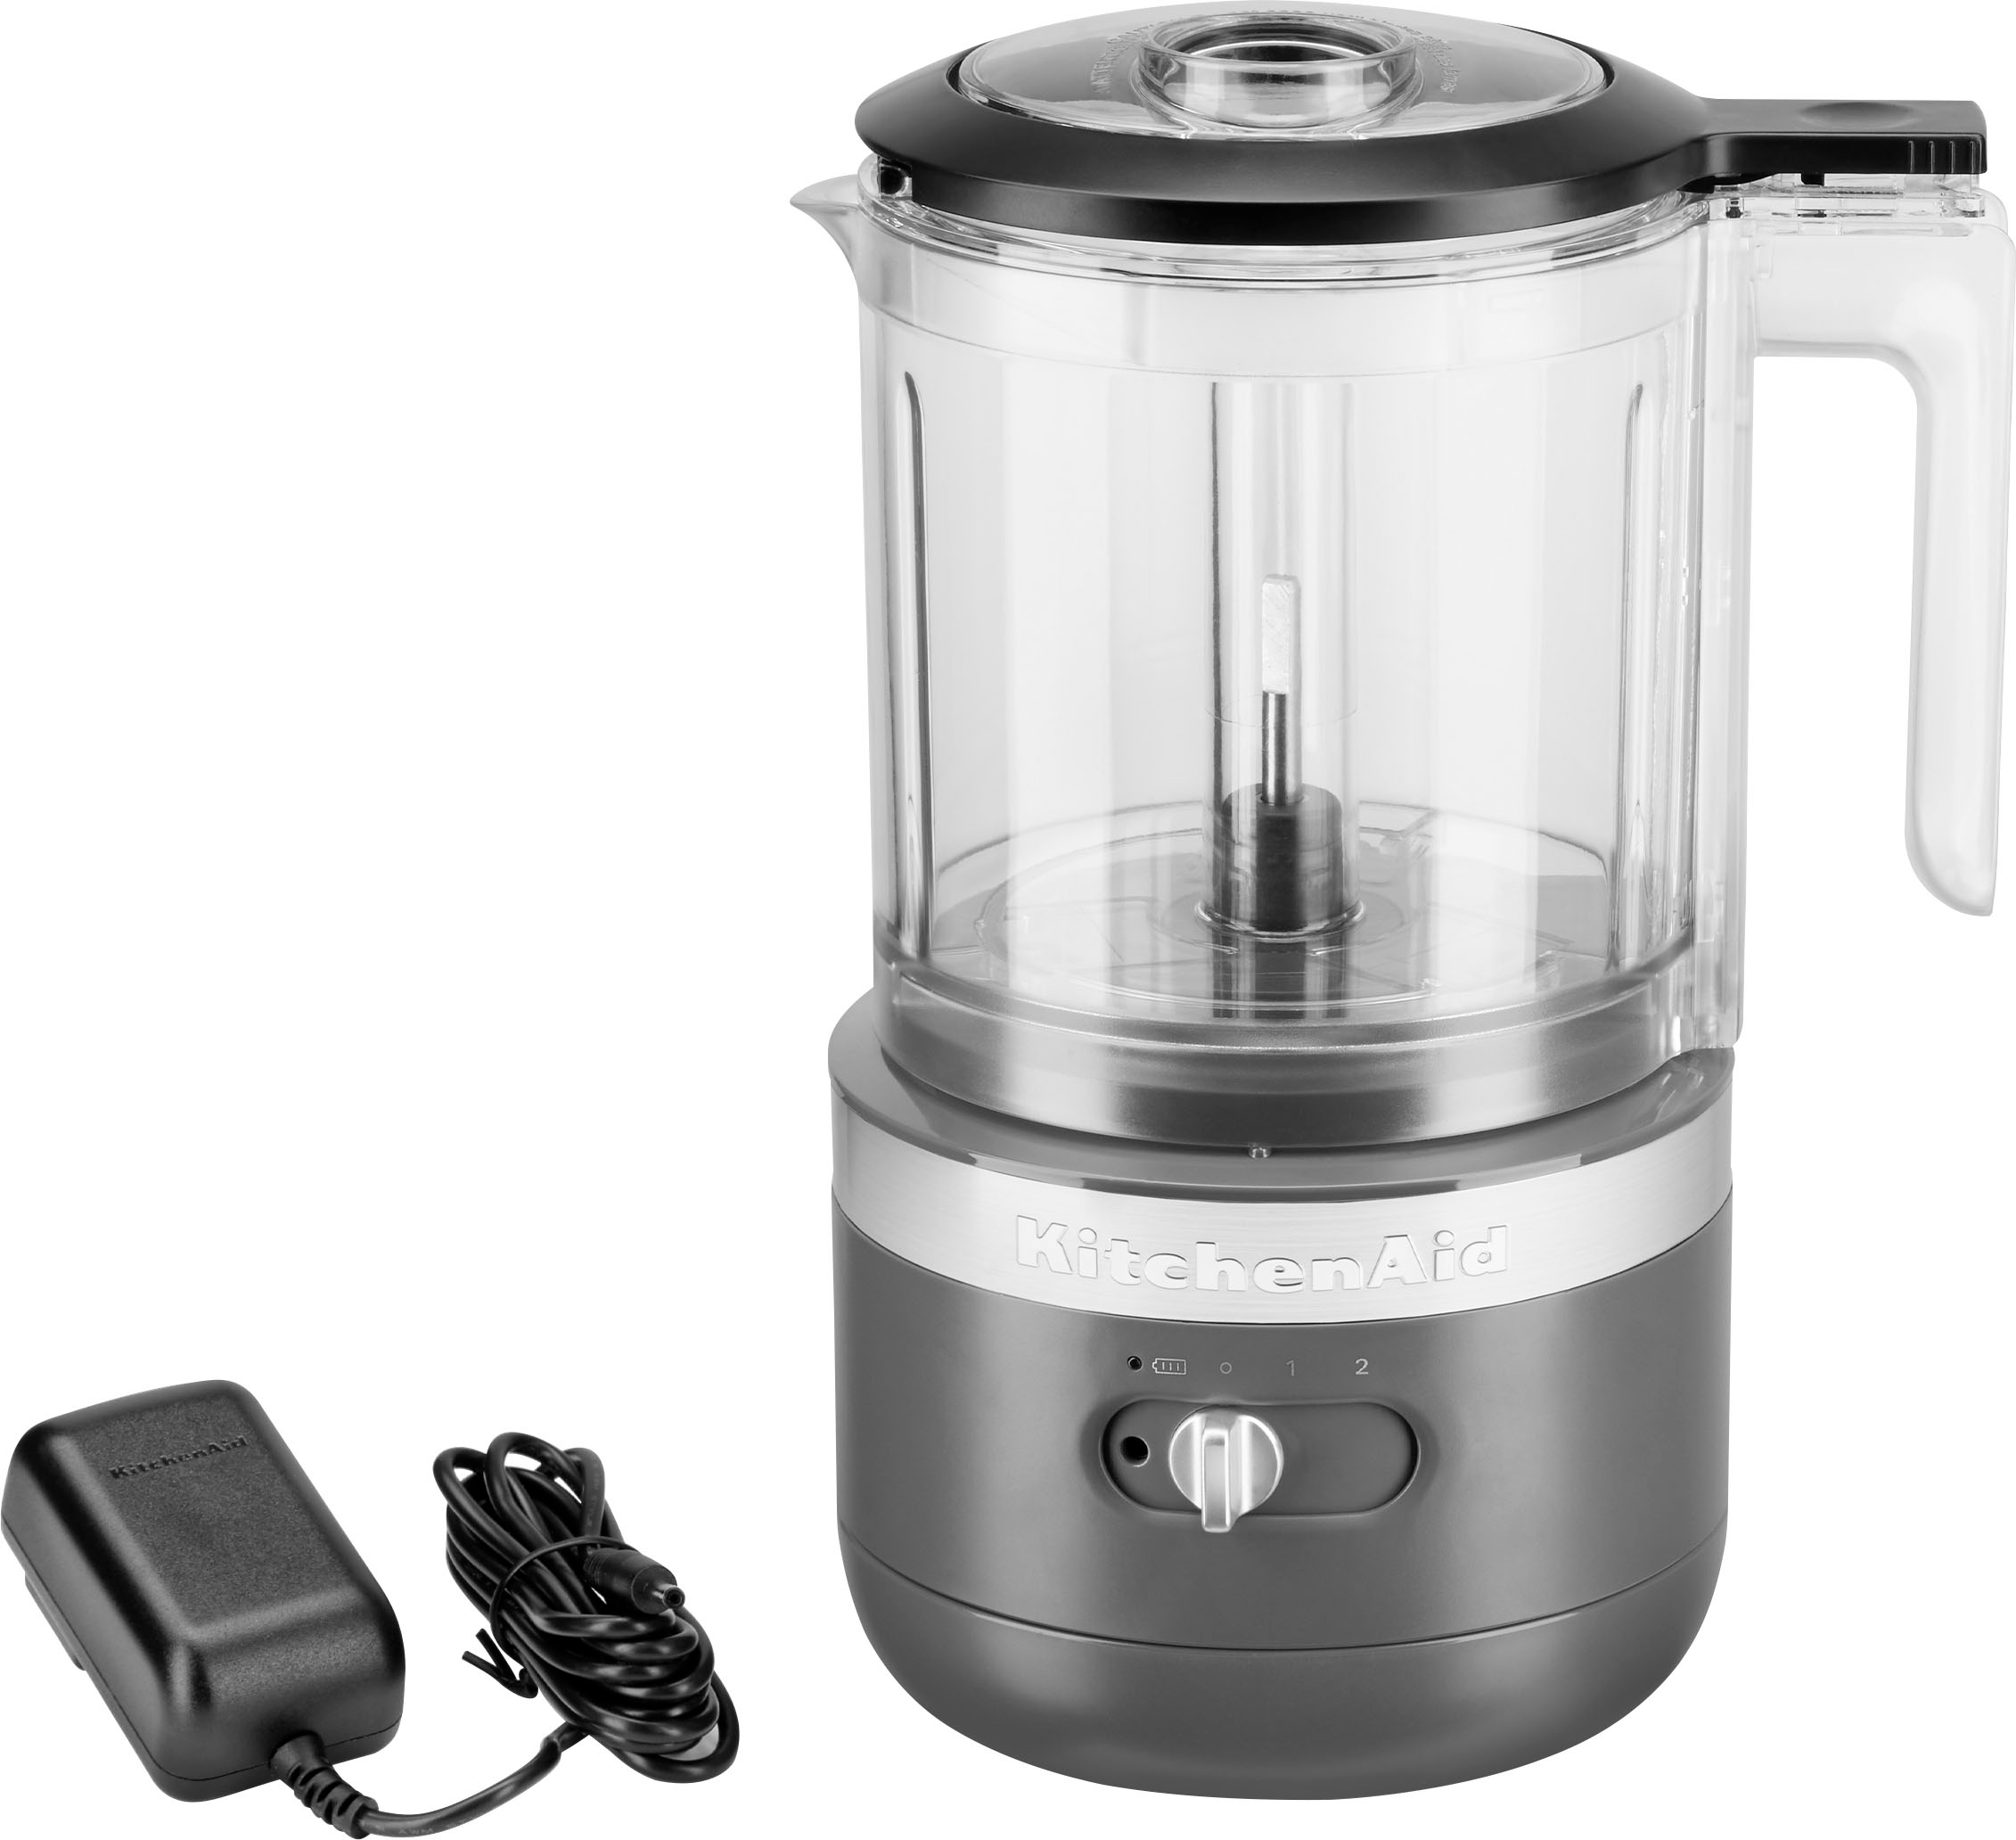 Cordless Blender and Cup